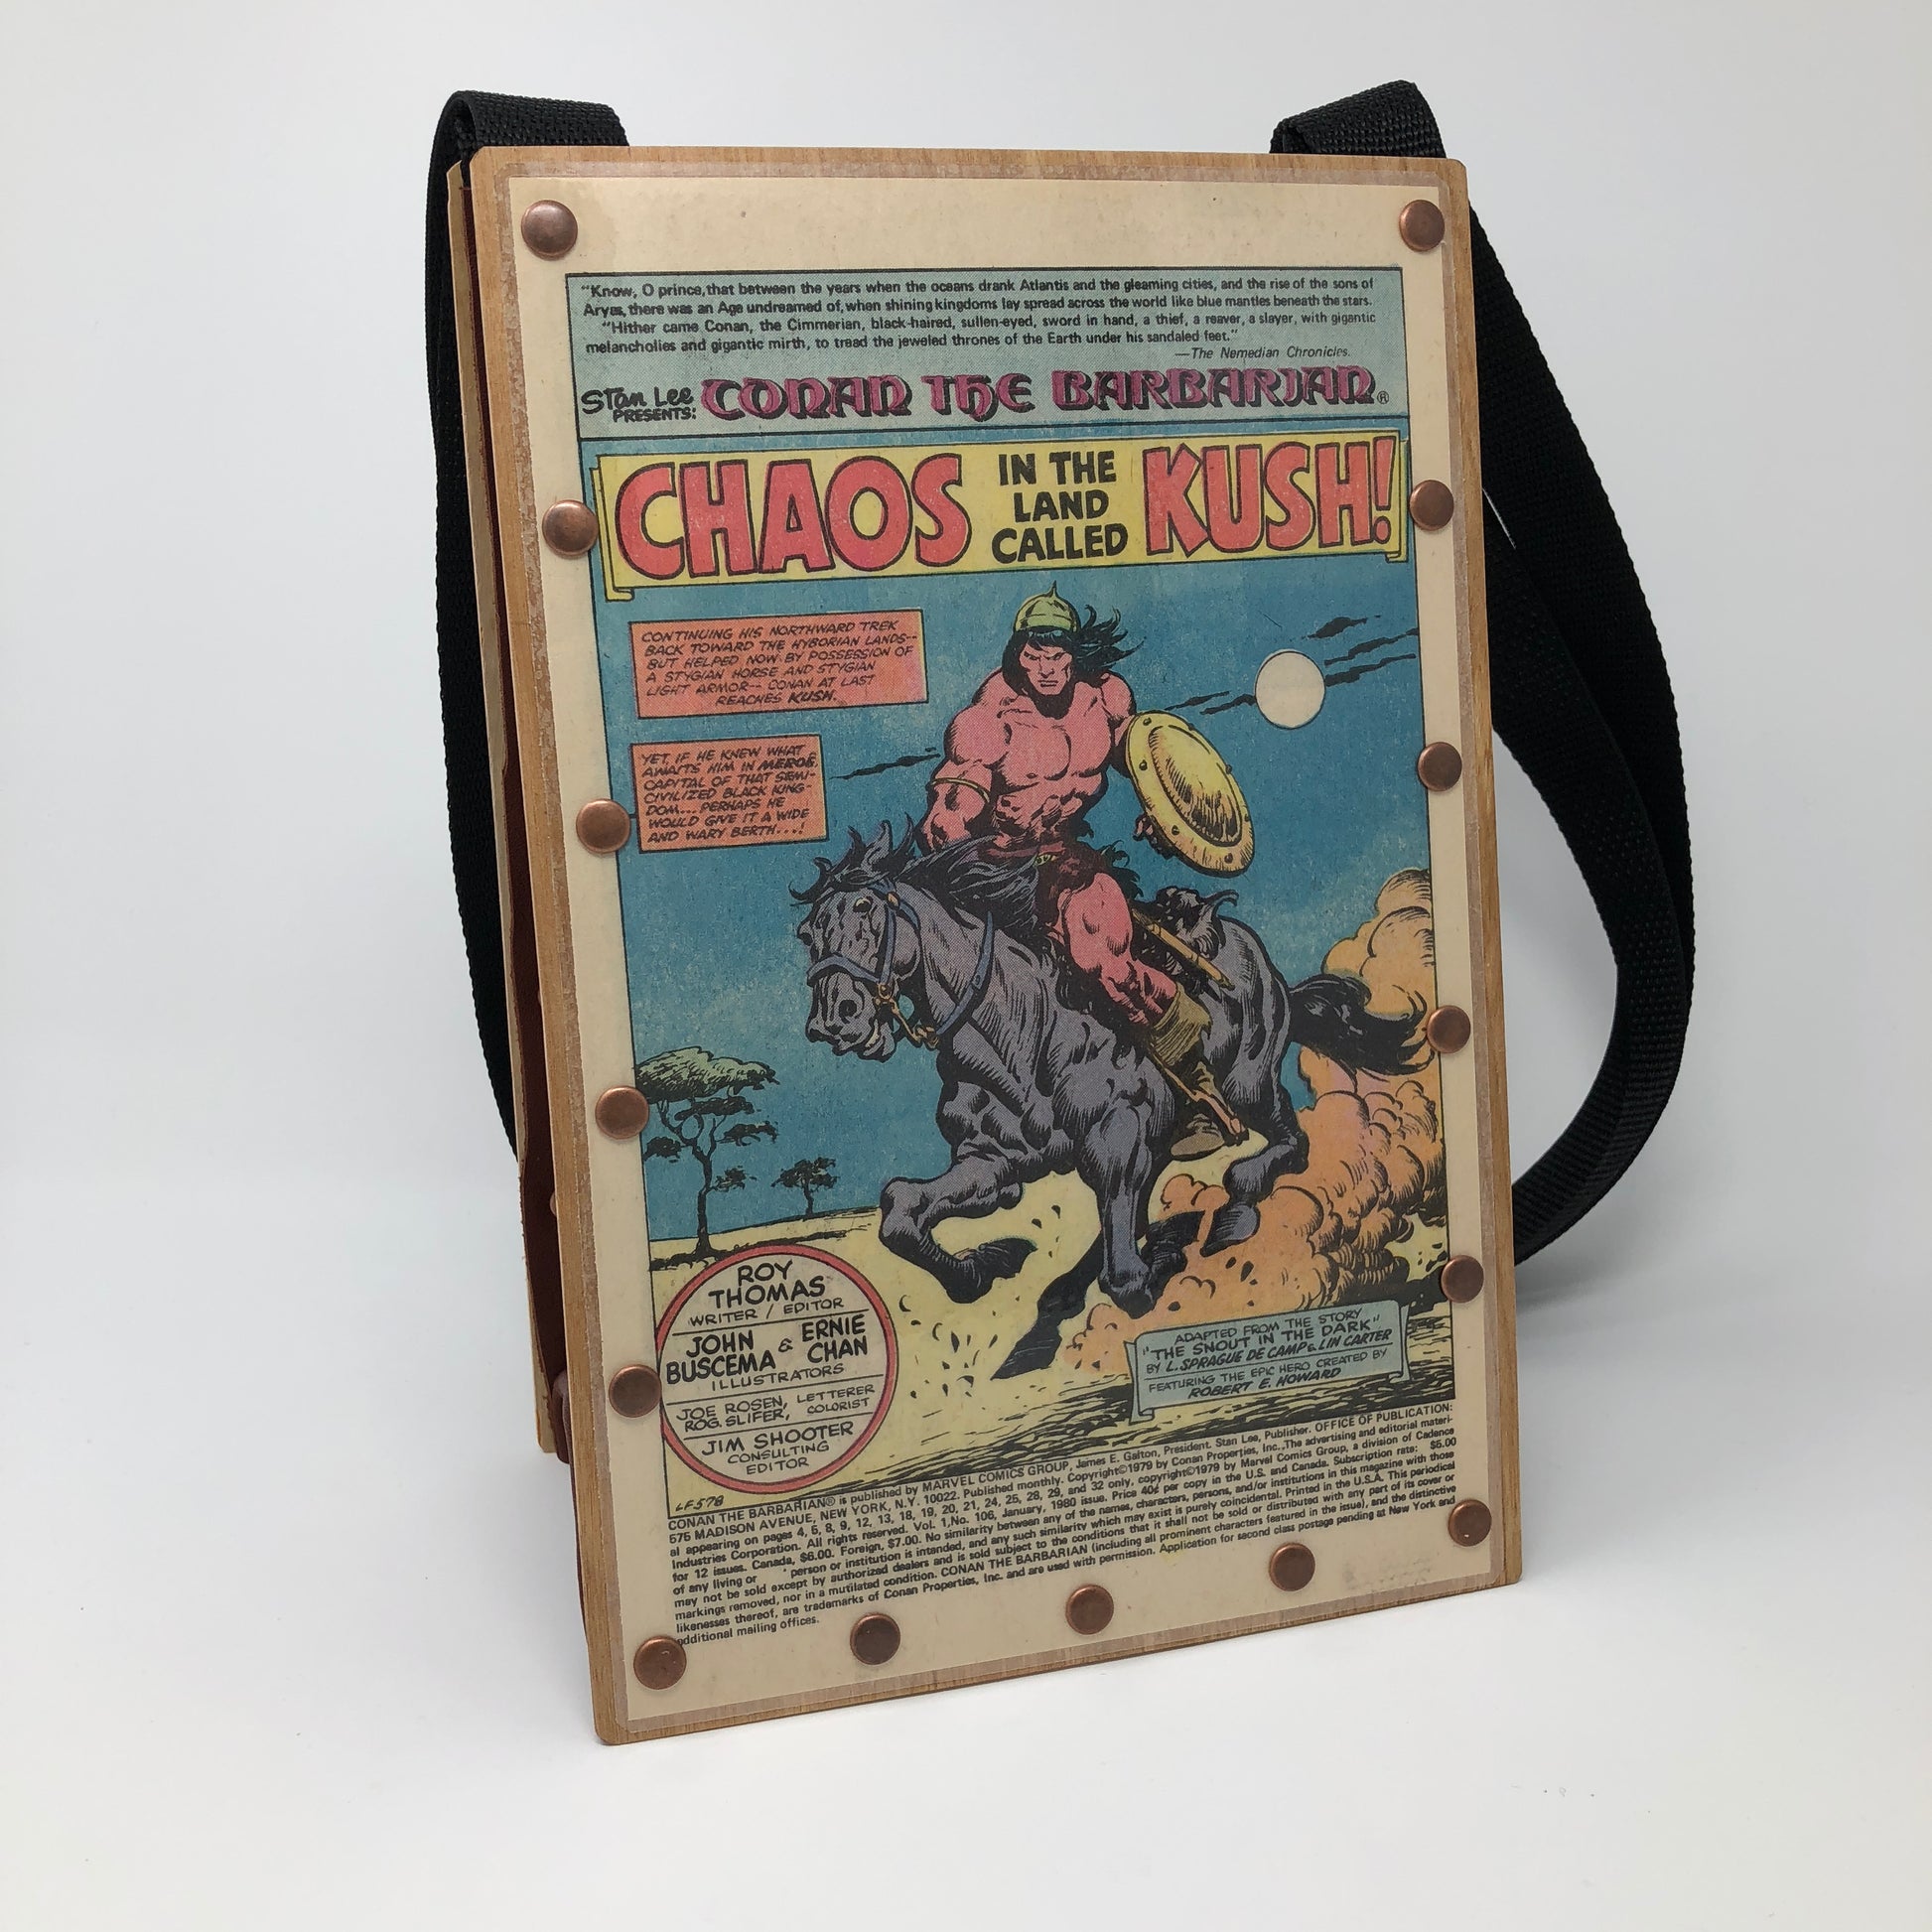 Vintage Conan comic back cover - Chaos in the land called Kush!